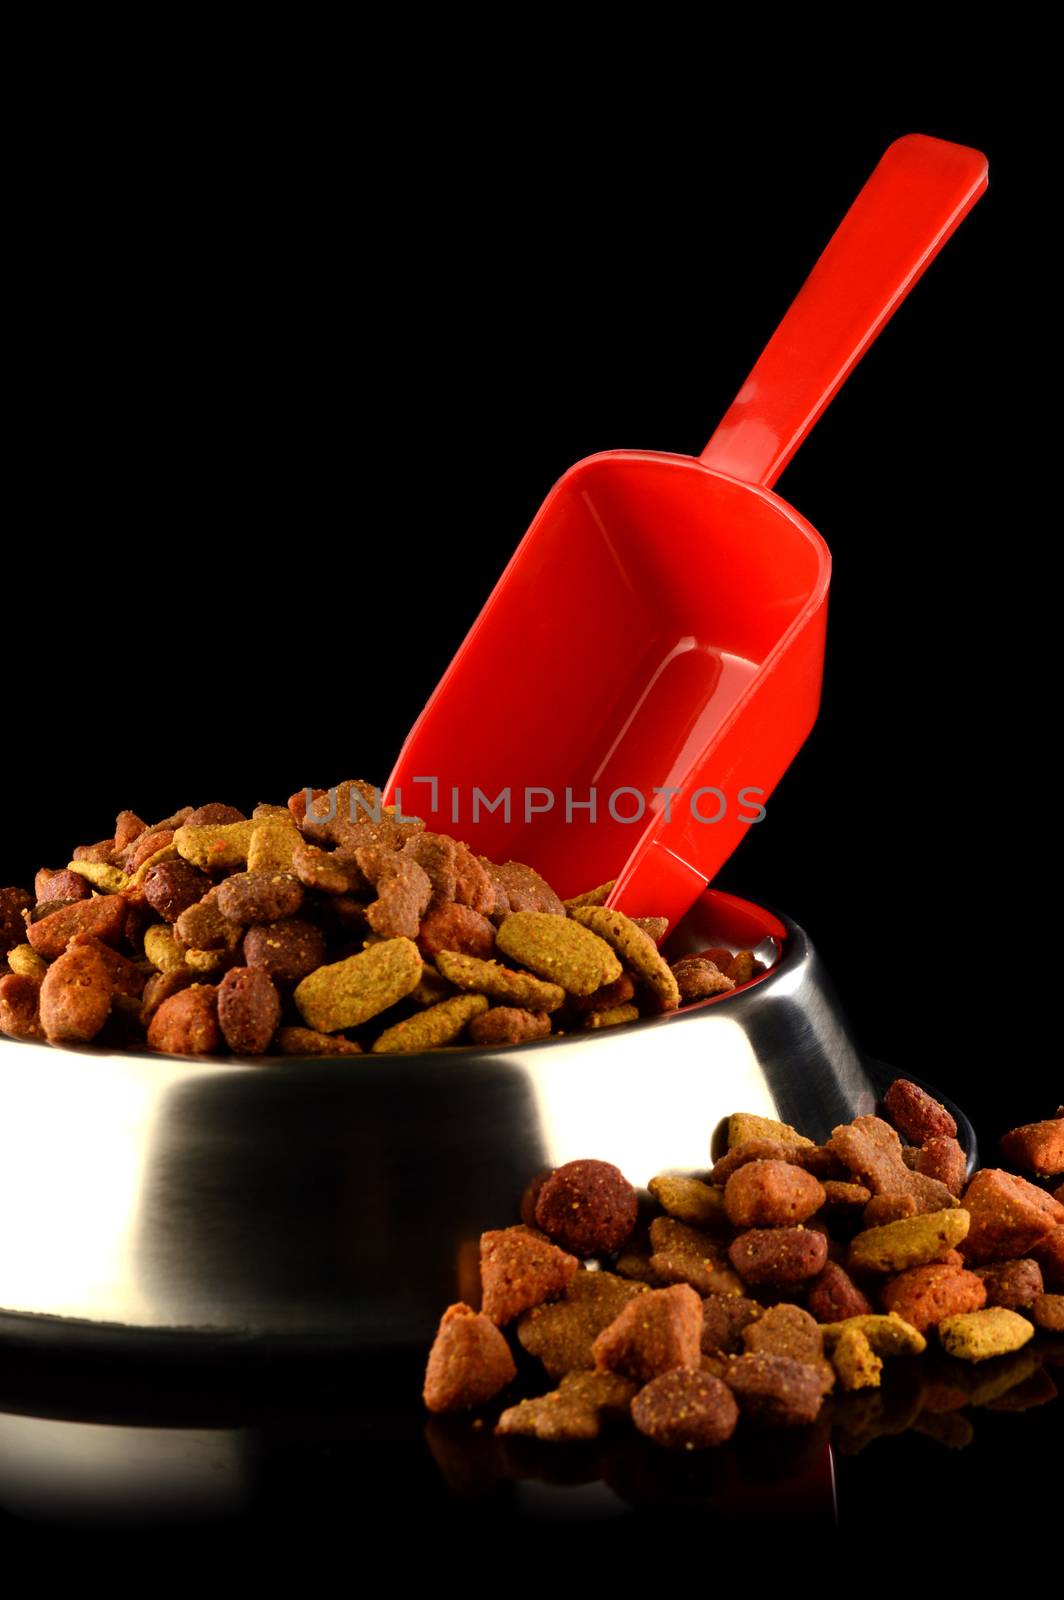 Scoops Of Dog Food by AlphaBaby